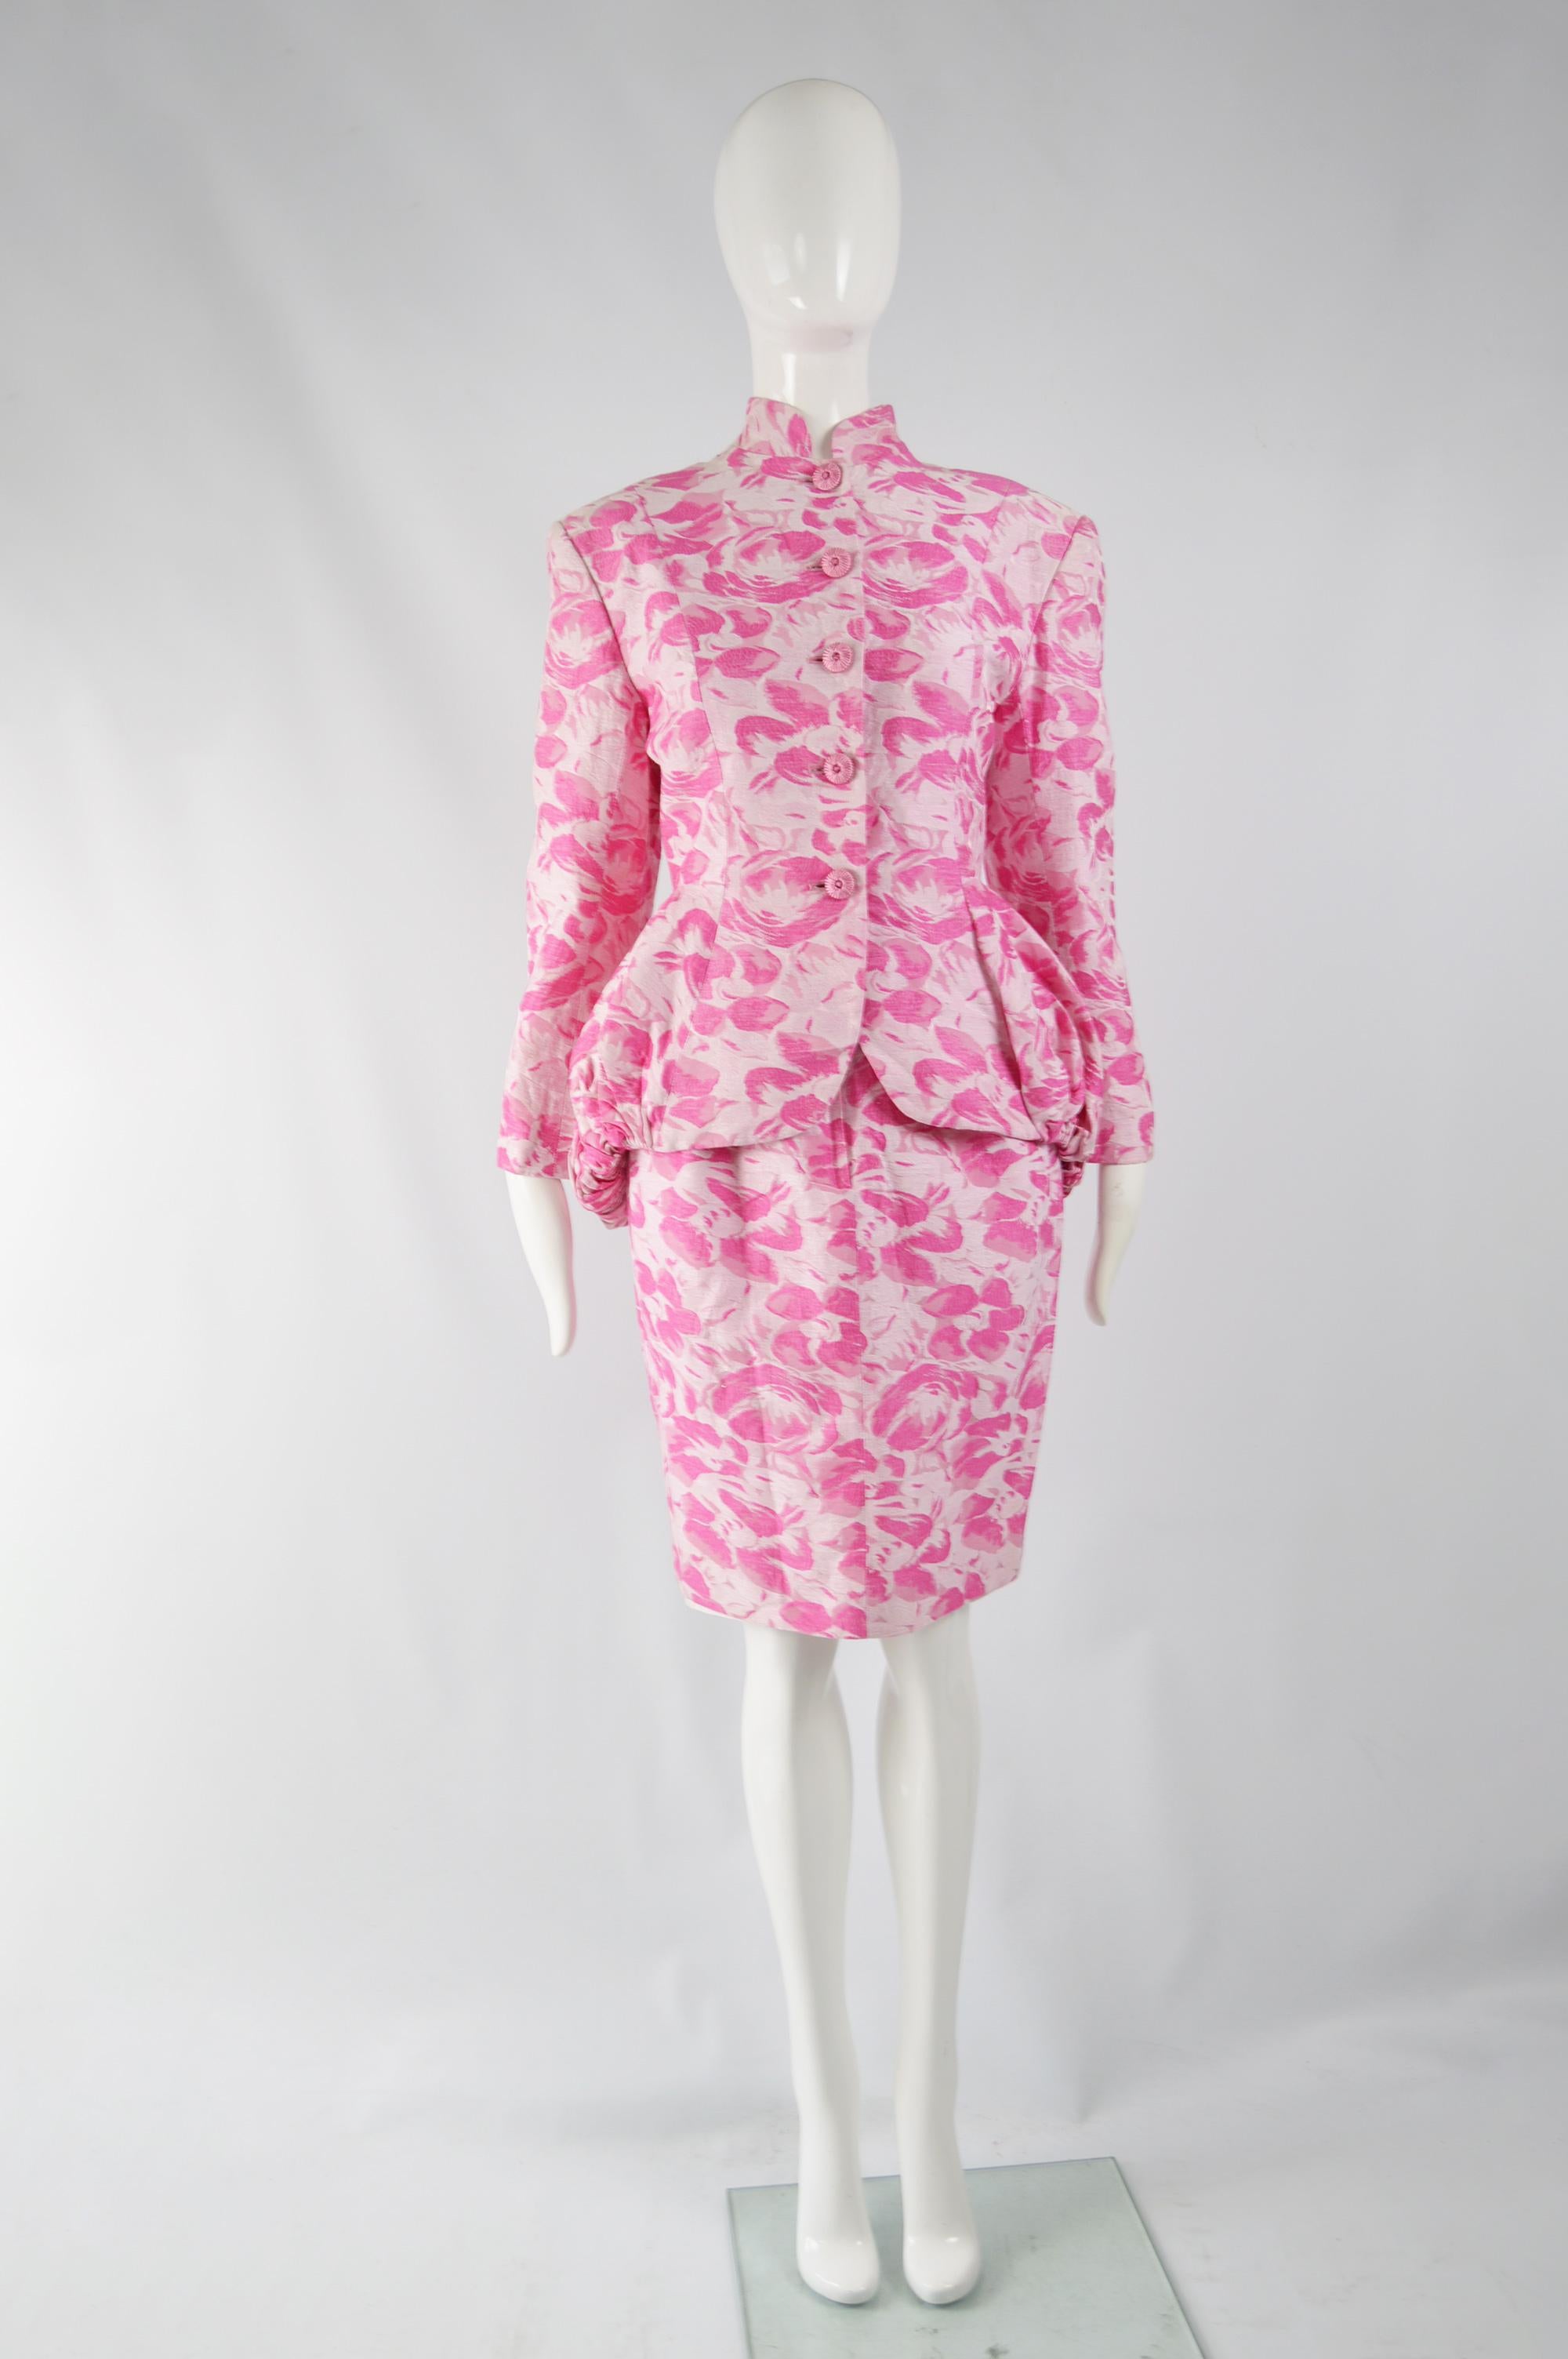 A stunning and rare vintage womens two piece skirt and jacket ensemble from the 80s by legendary British fashion designer, Antony Price whose list of accomplishments and celebrity clients is huge, including David Bowie, Diana Ross, Jerry Hall & Dita